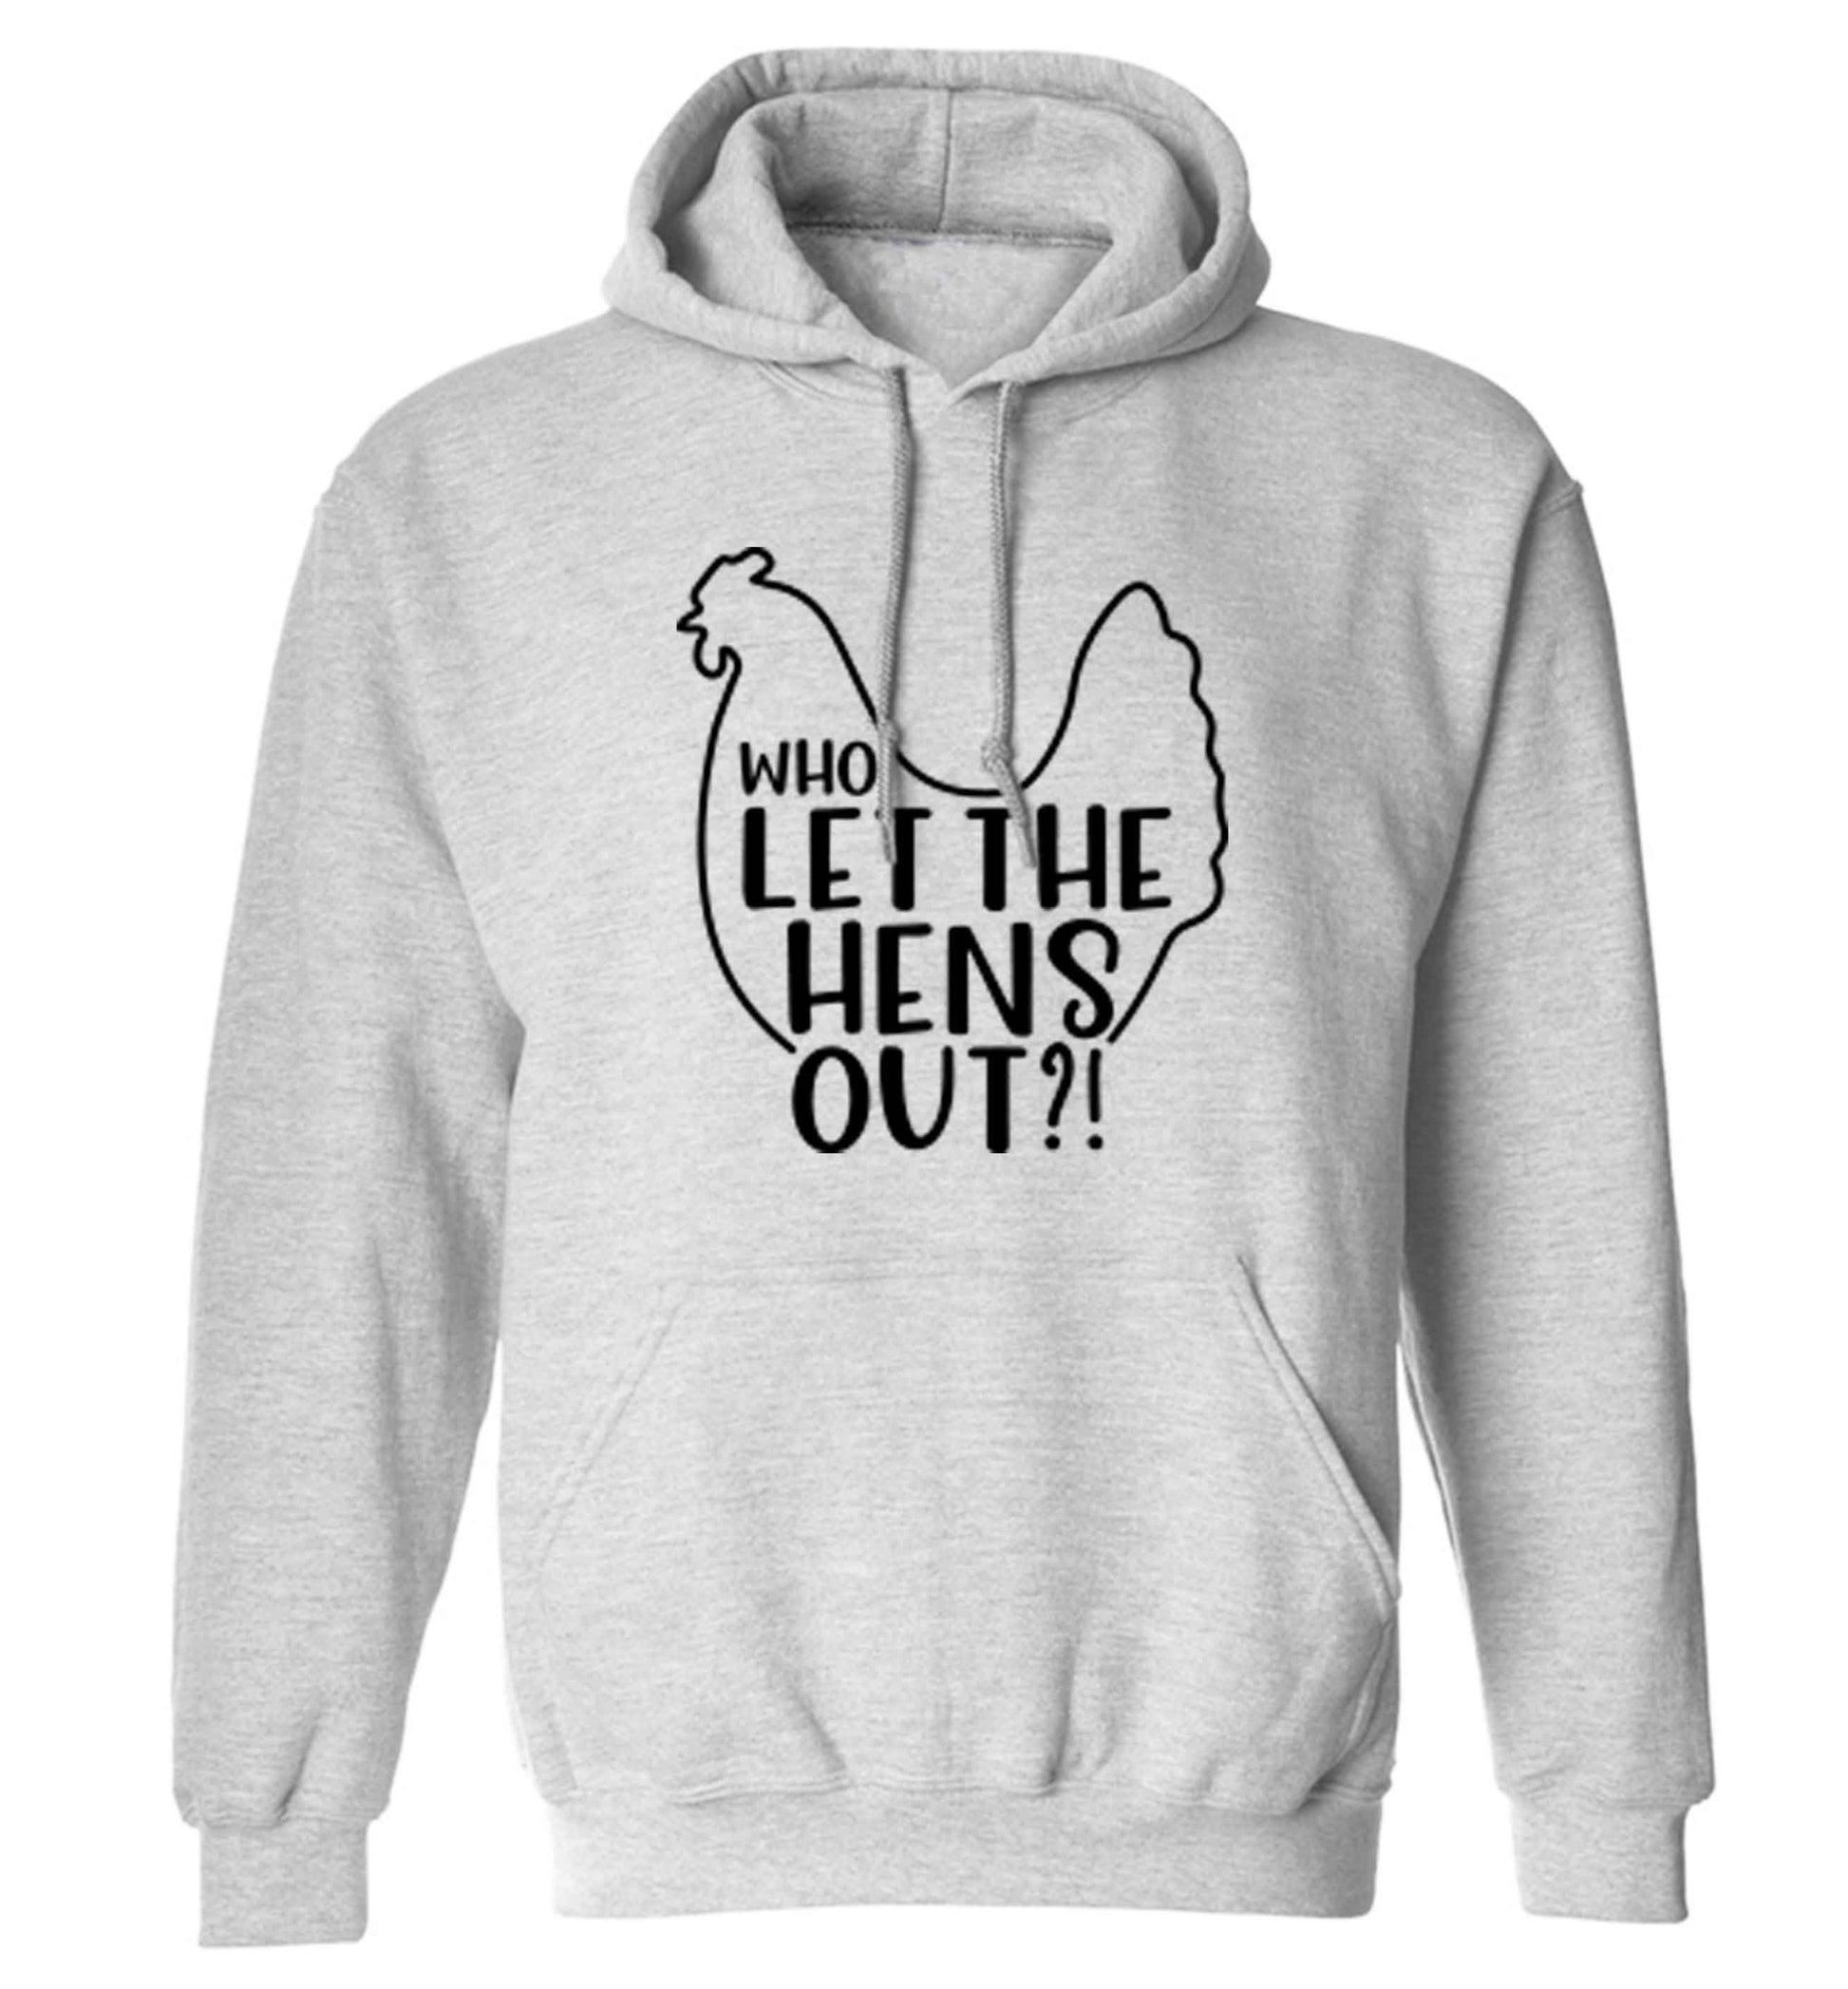 Who let the hens out adults unisex grey hoodie 2XL